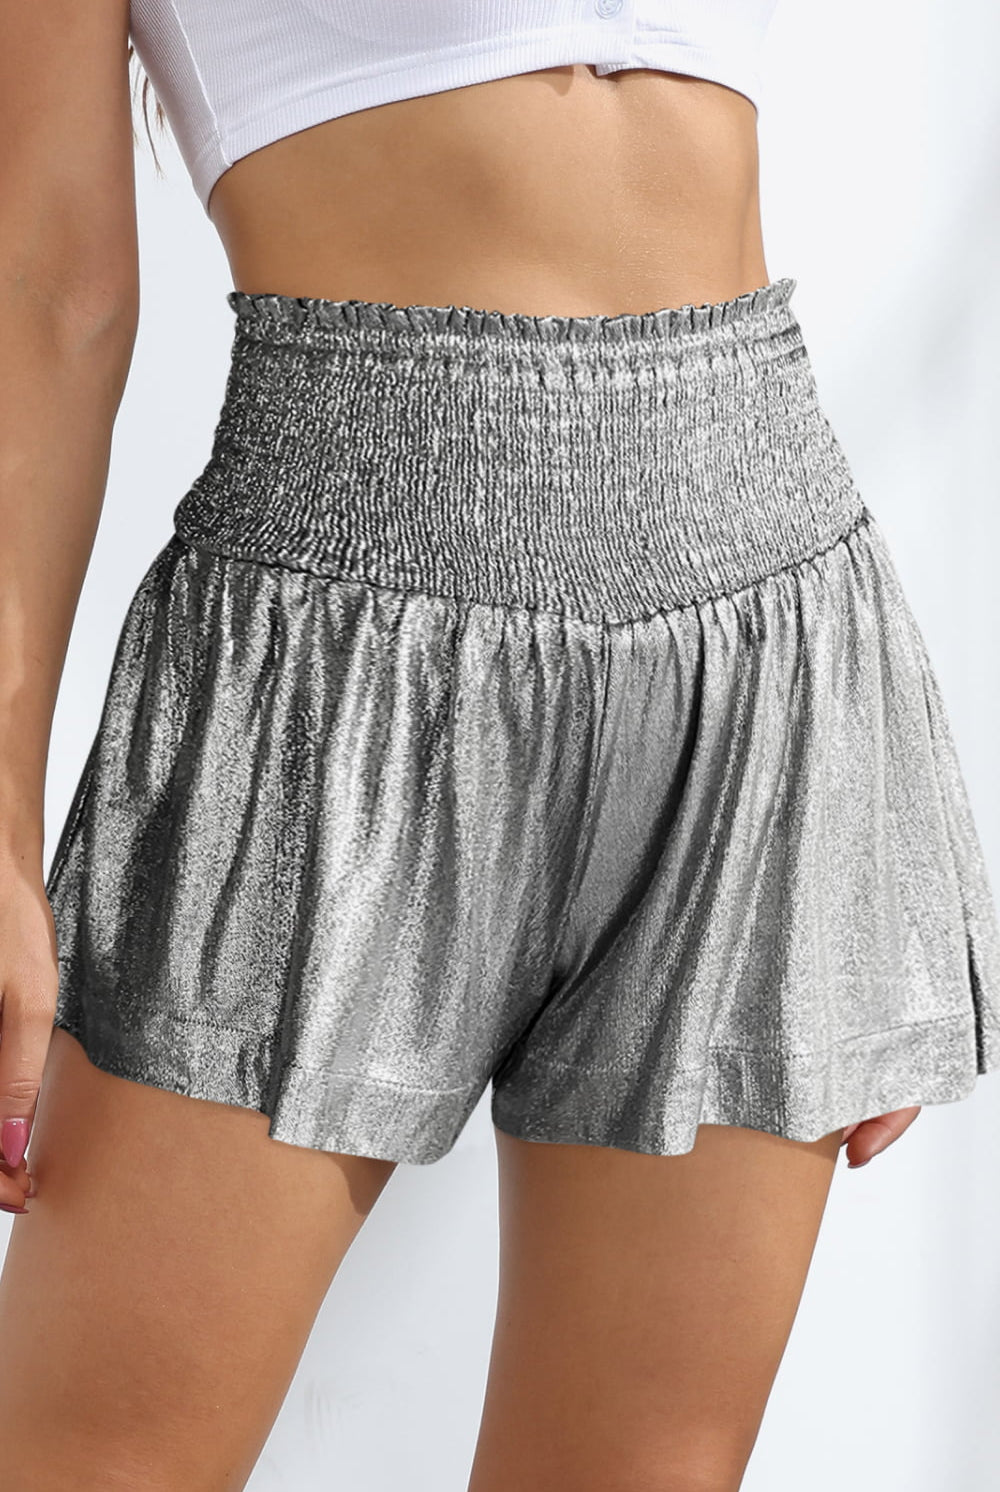 Rosy Brown Try To Pay Attention Glitter Smocked High-Waist Shorts Shorts